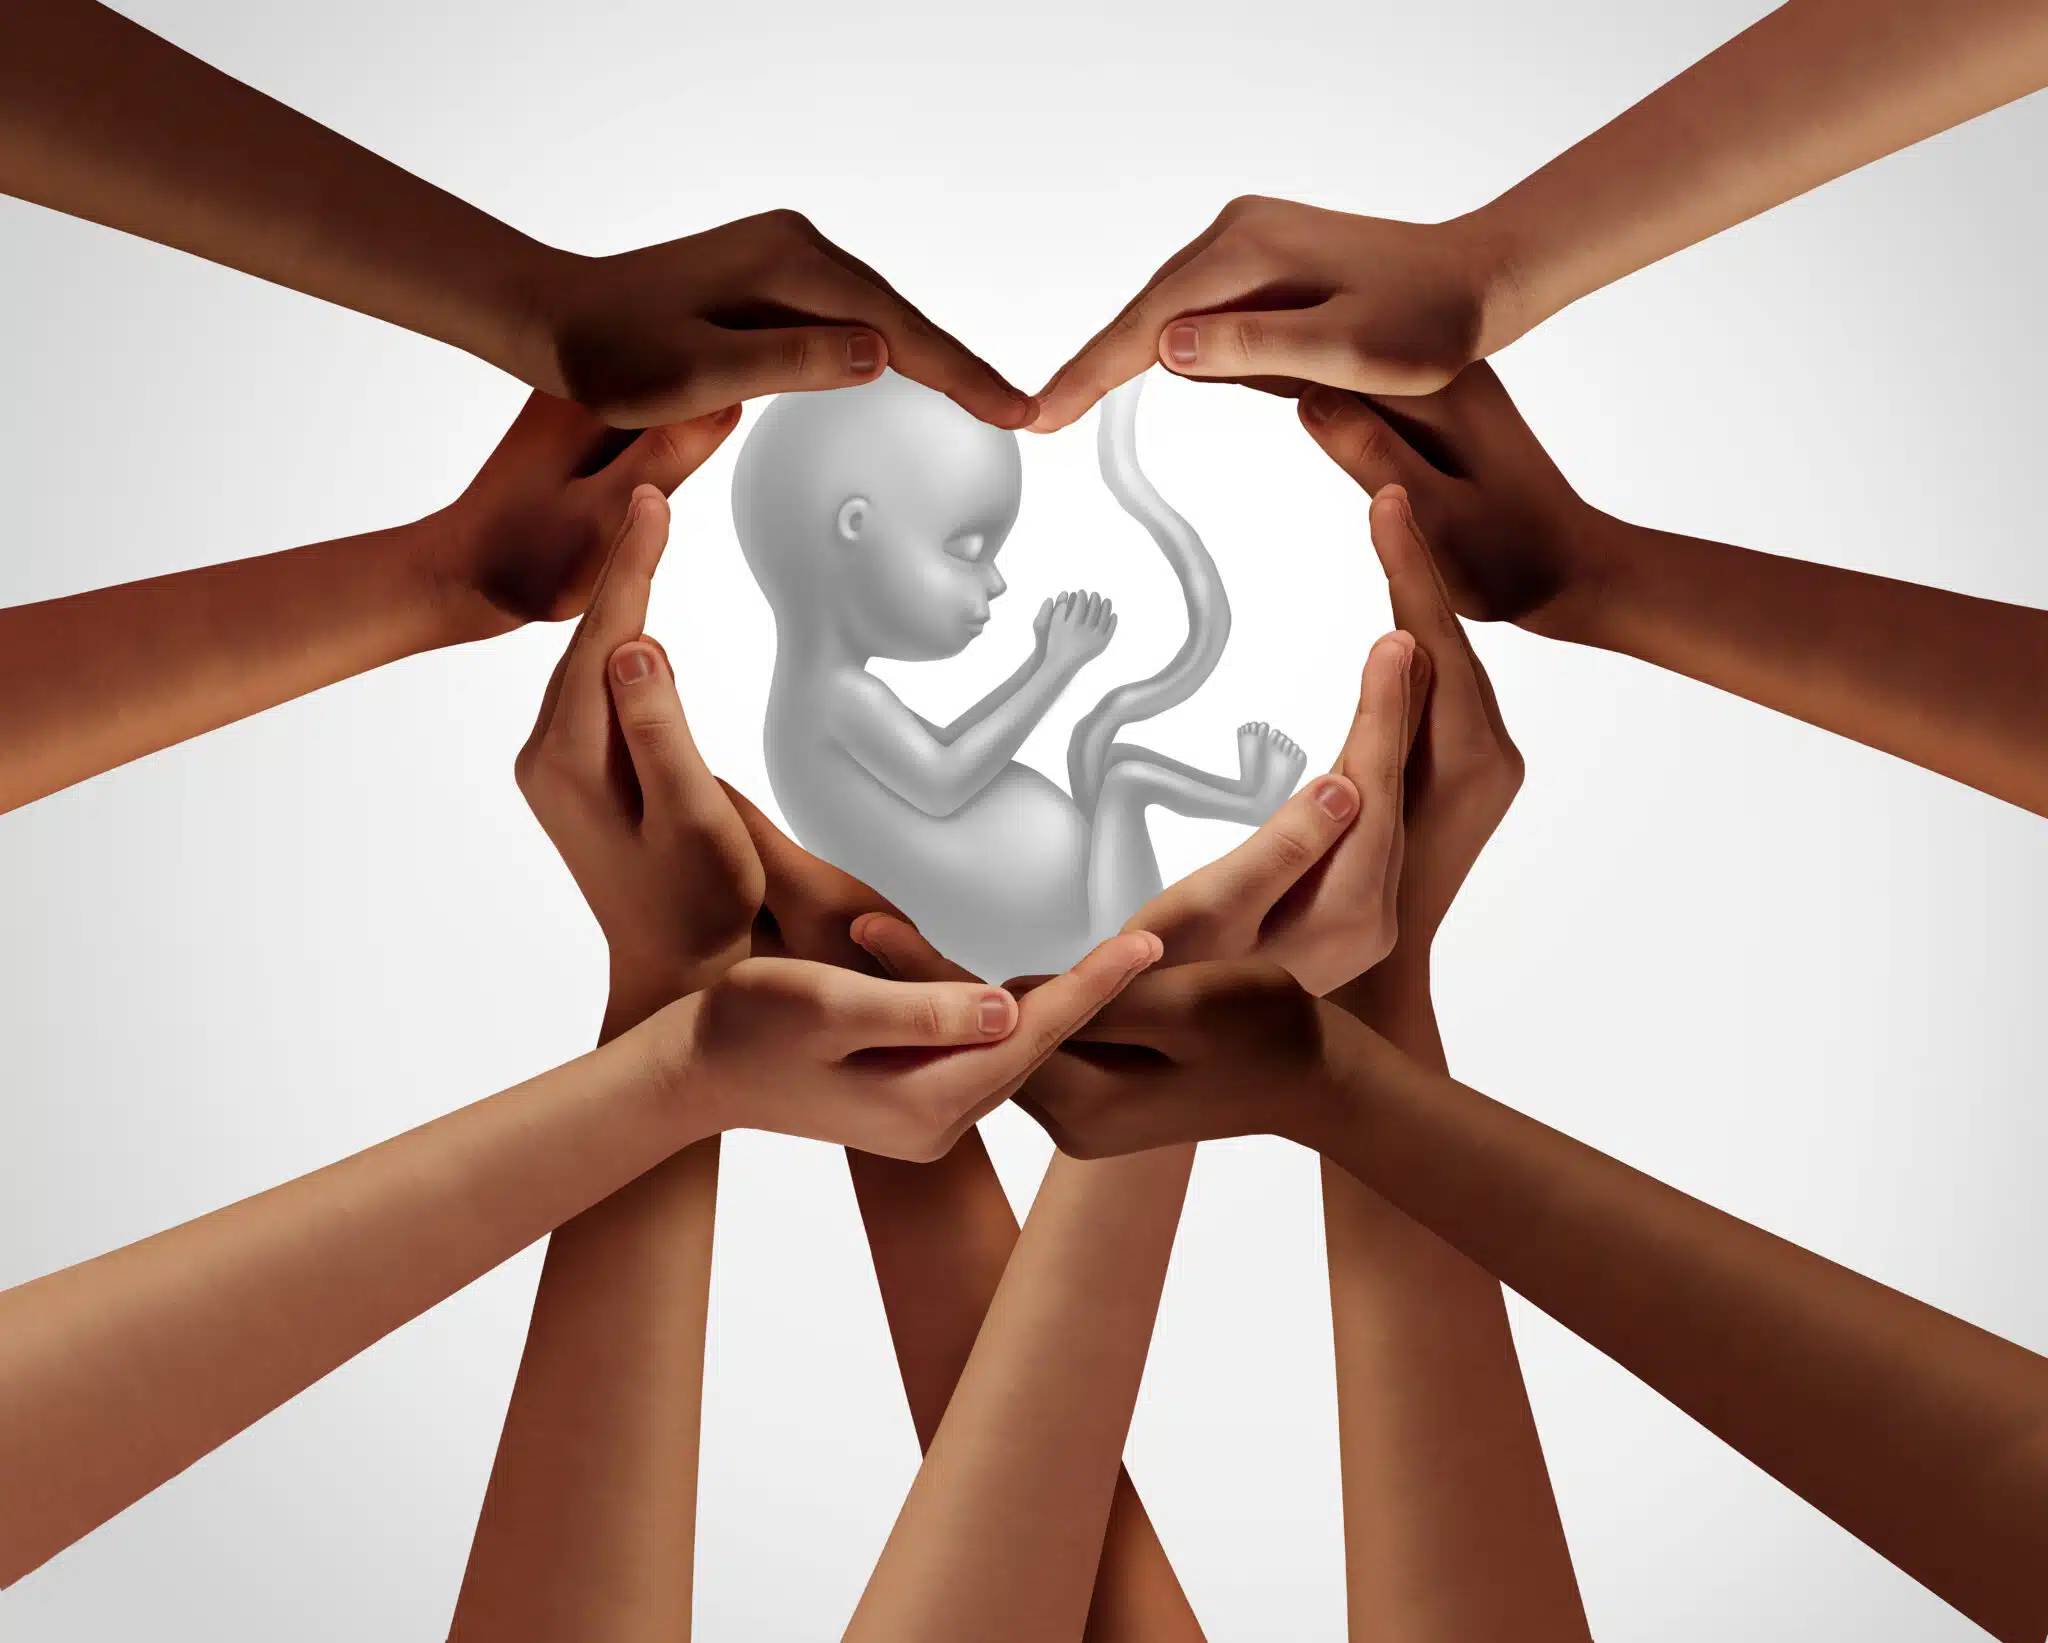 hands holding image of preborn child